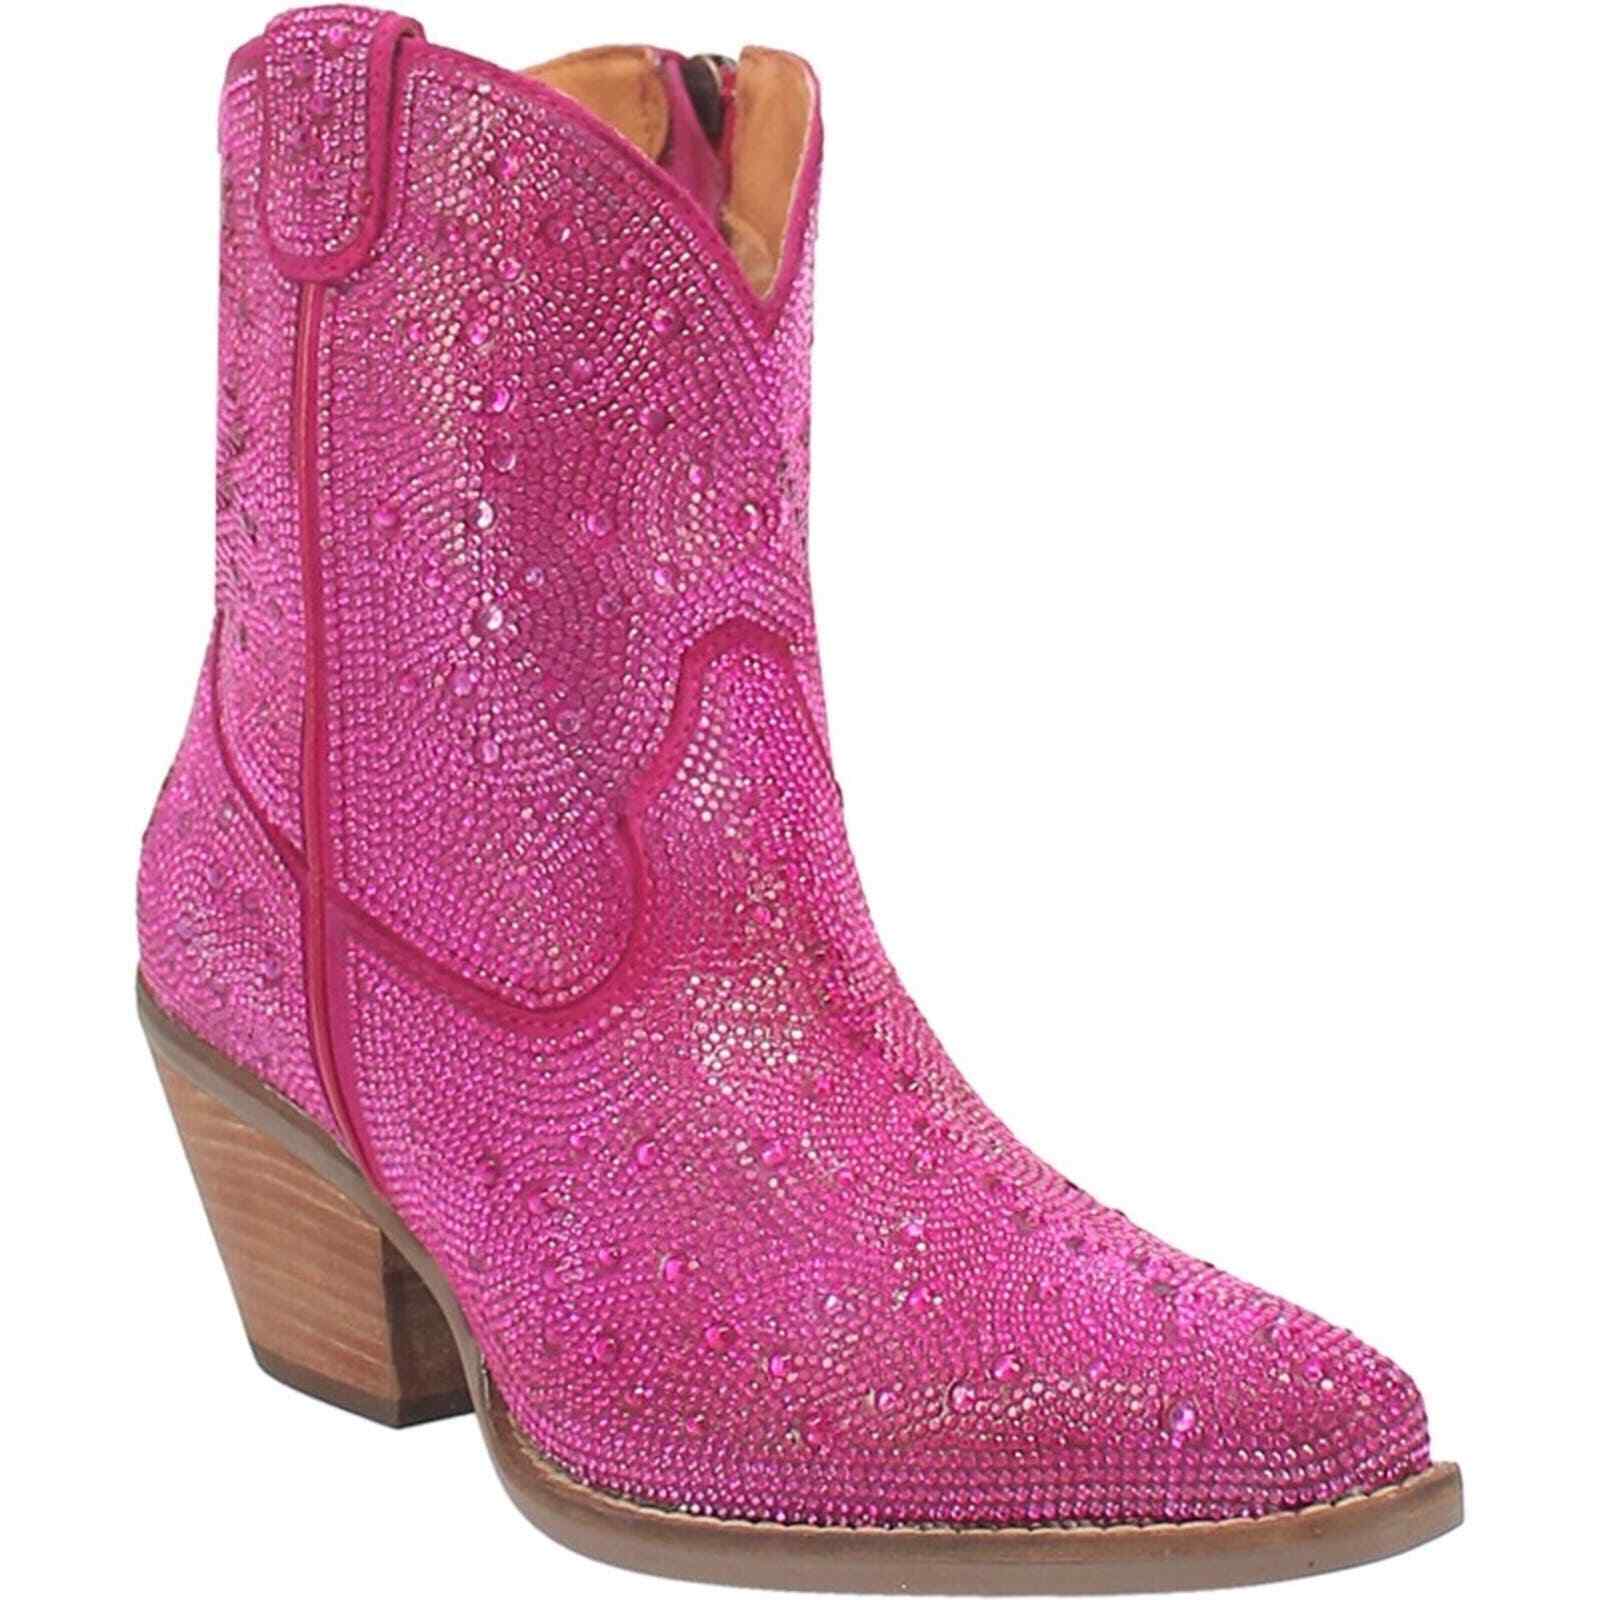 RHINESTONE COWGIRL LEATHER BOOTIE Bright Pink Size 9 NWOB